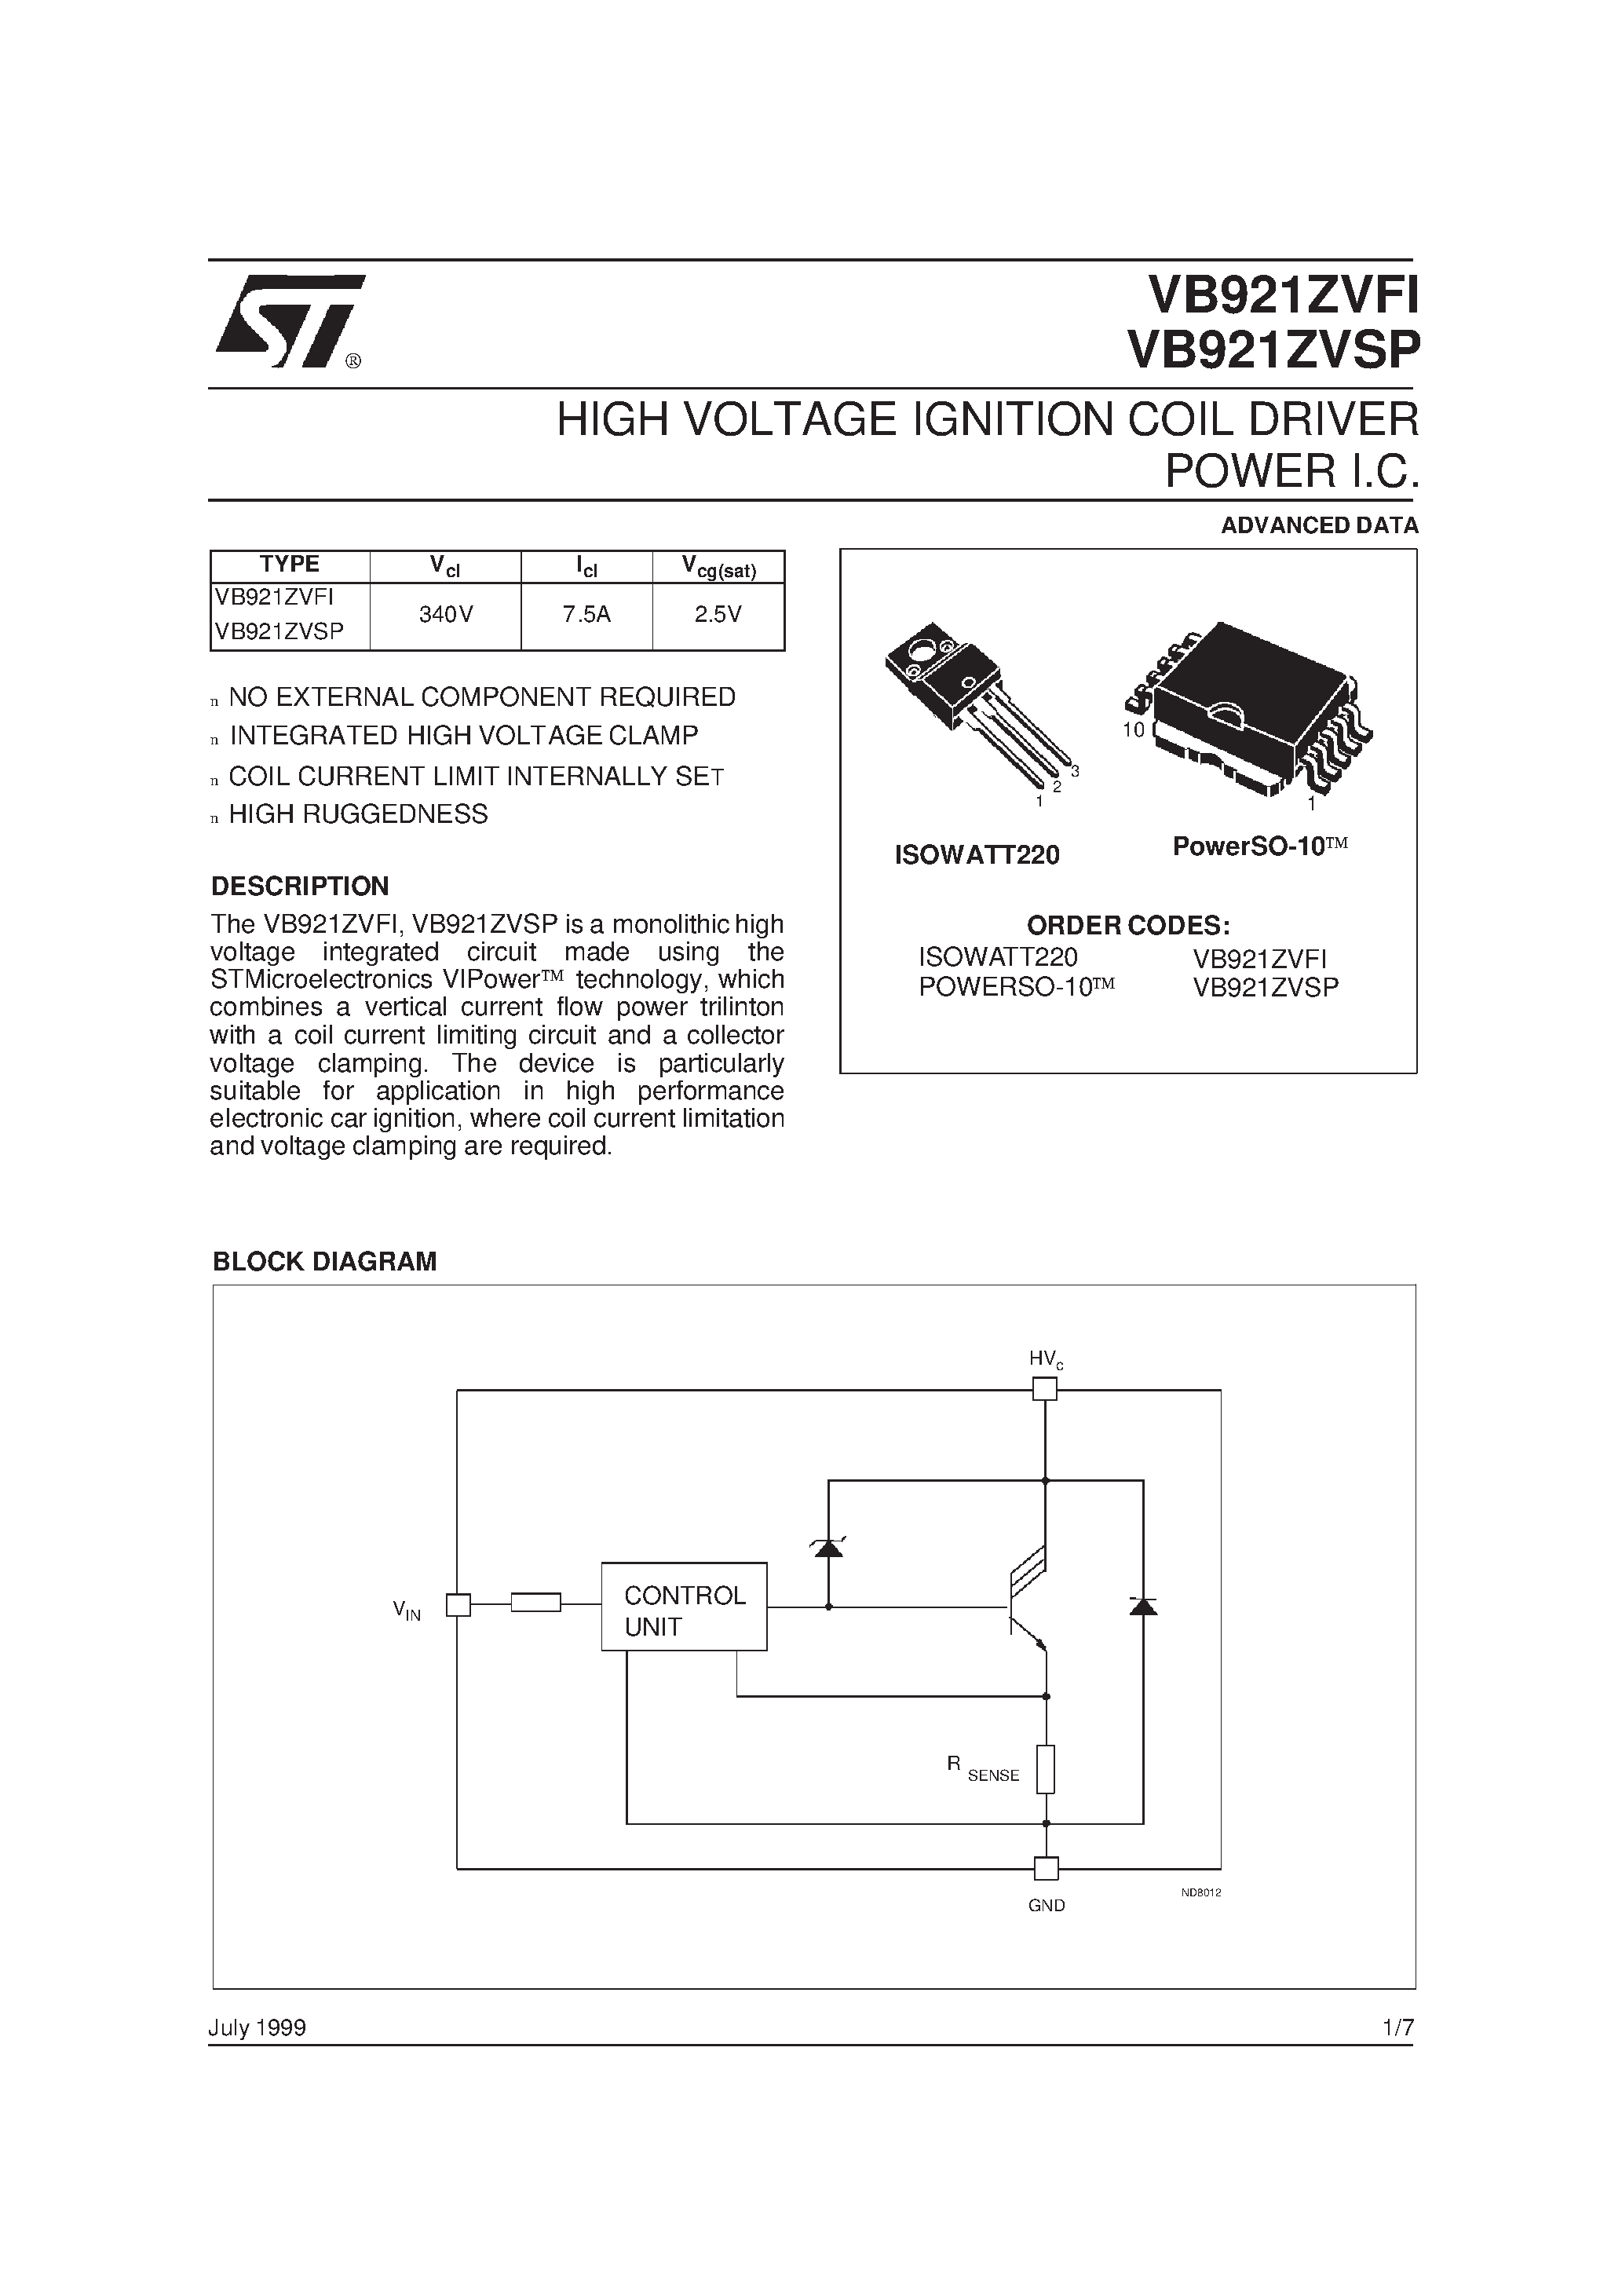 Datasheet VB921ZVFI - HIGH VOLTAGE IGNITION COIL DRIVER POWER I.C. page 1